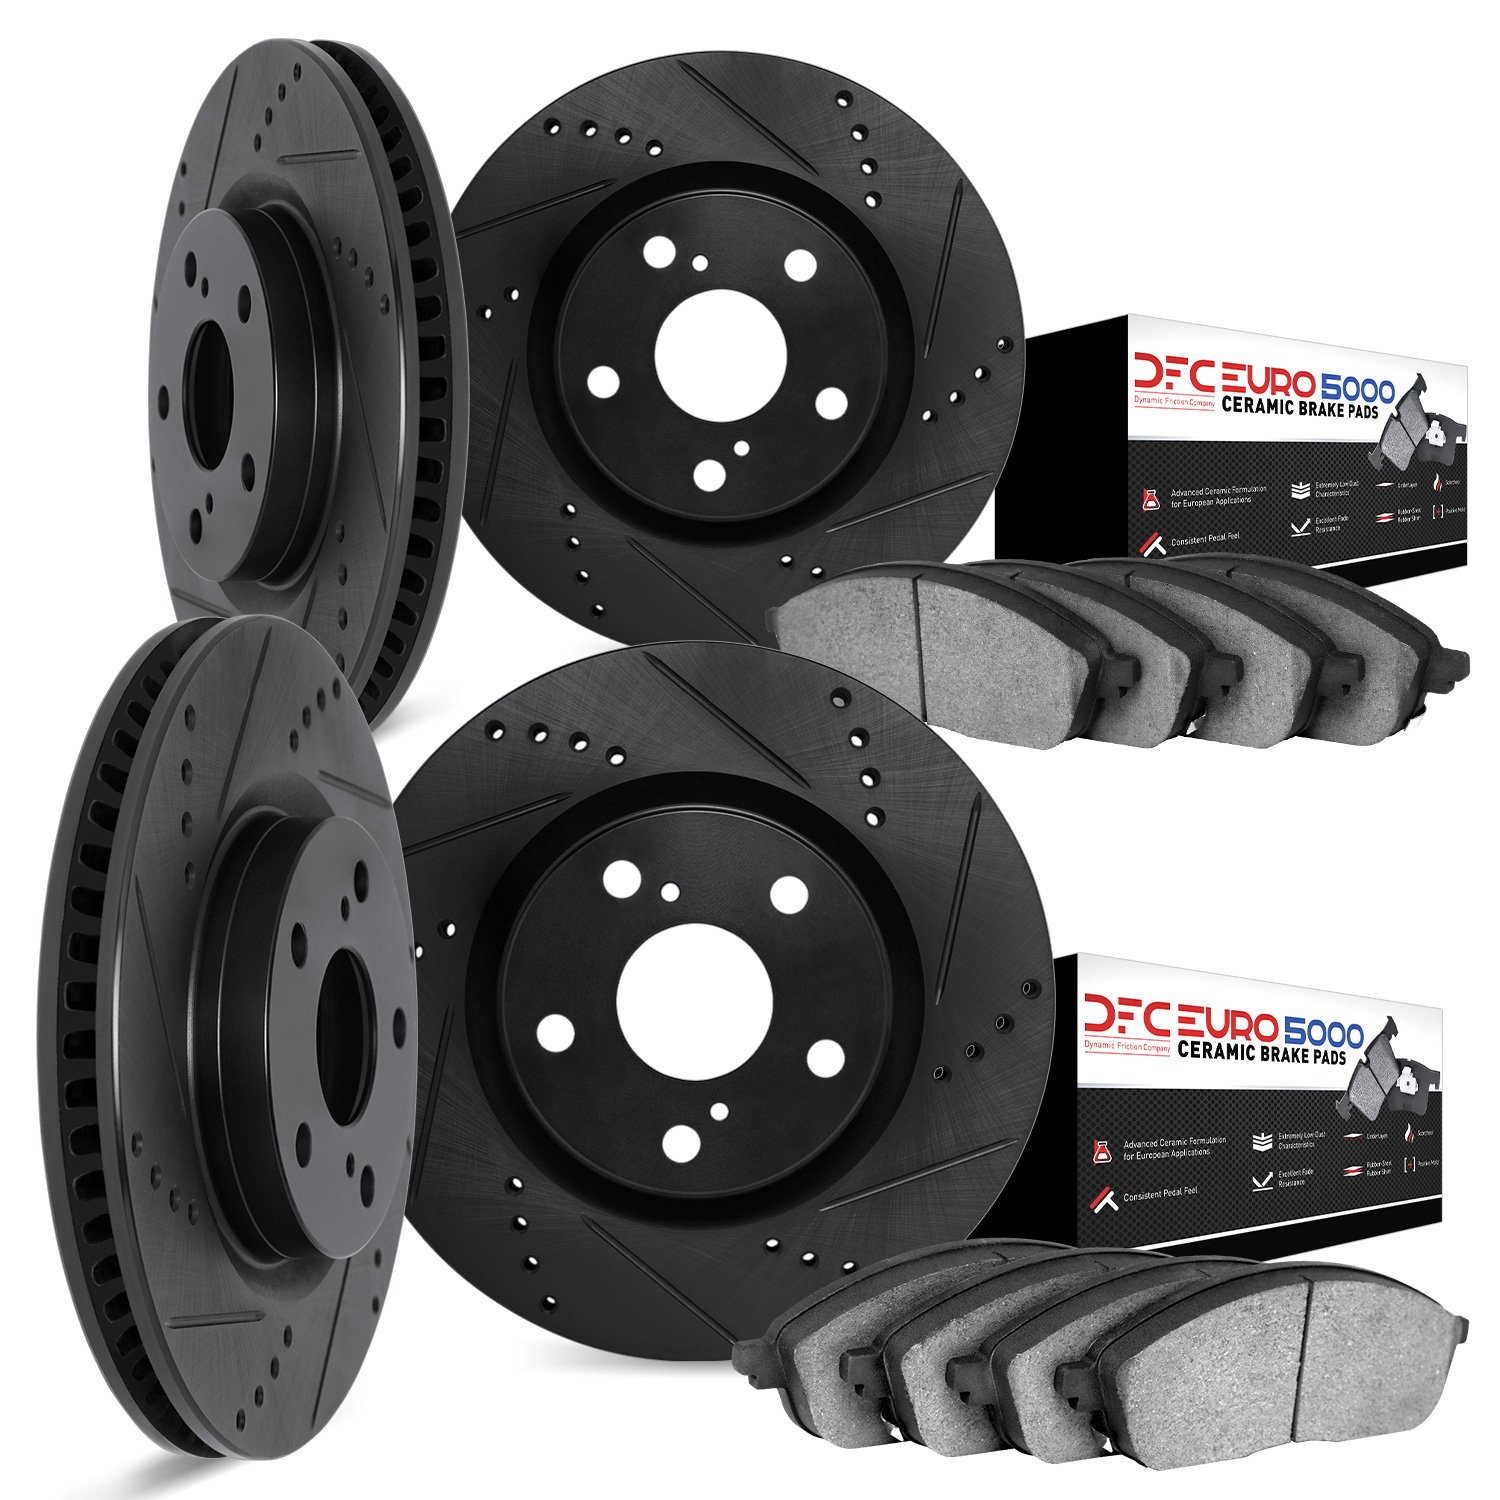 8604-31020 Drilled/Slotted Brake Rotors w/5000 Euro Ceramic Brake Pads Kit [Black], 2004-2010 BMW, Position: Front and Rear